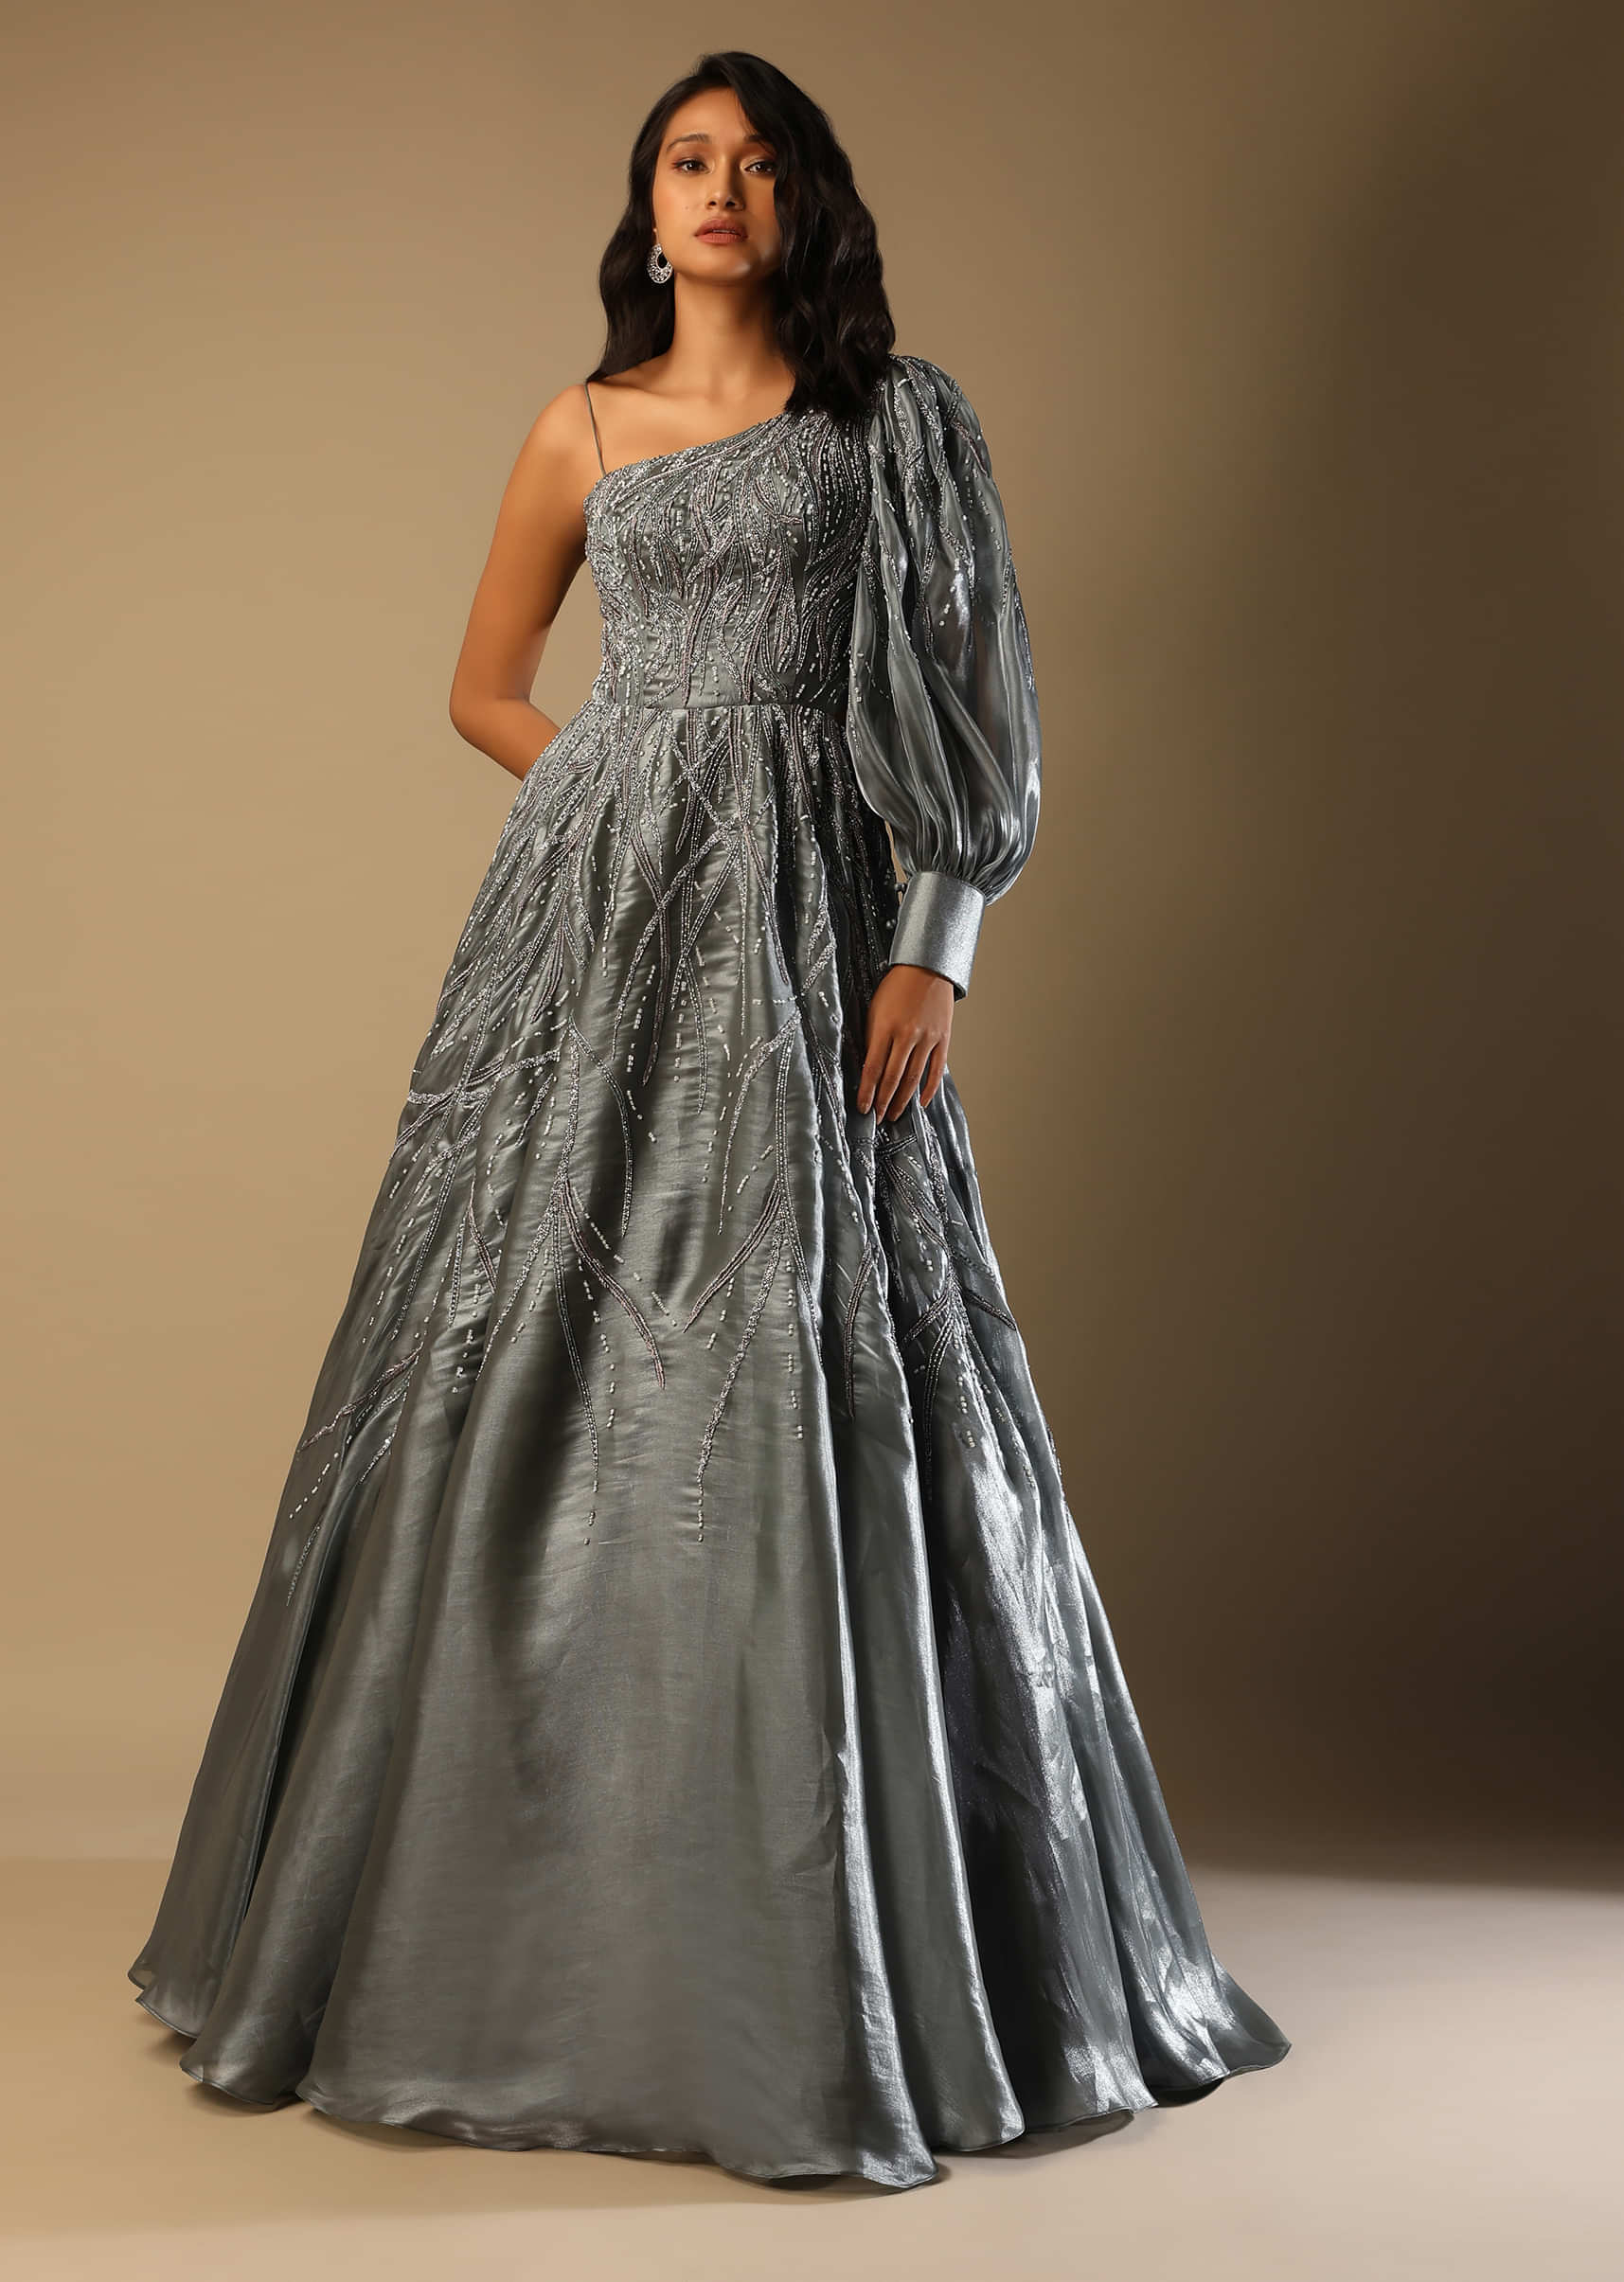 Fern Green Gown In Organza With One Side Bishop Sleeve And Hand Embroidered Modern Vine Motifs  